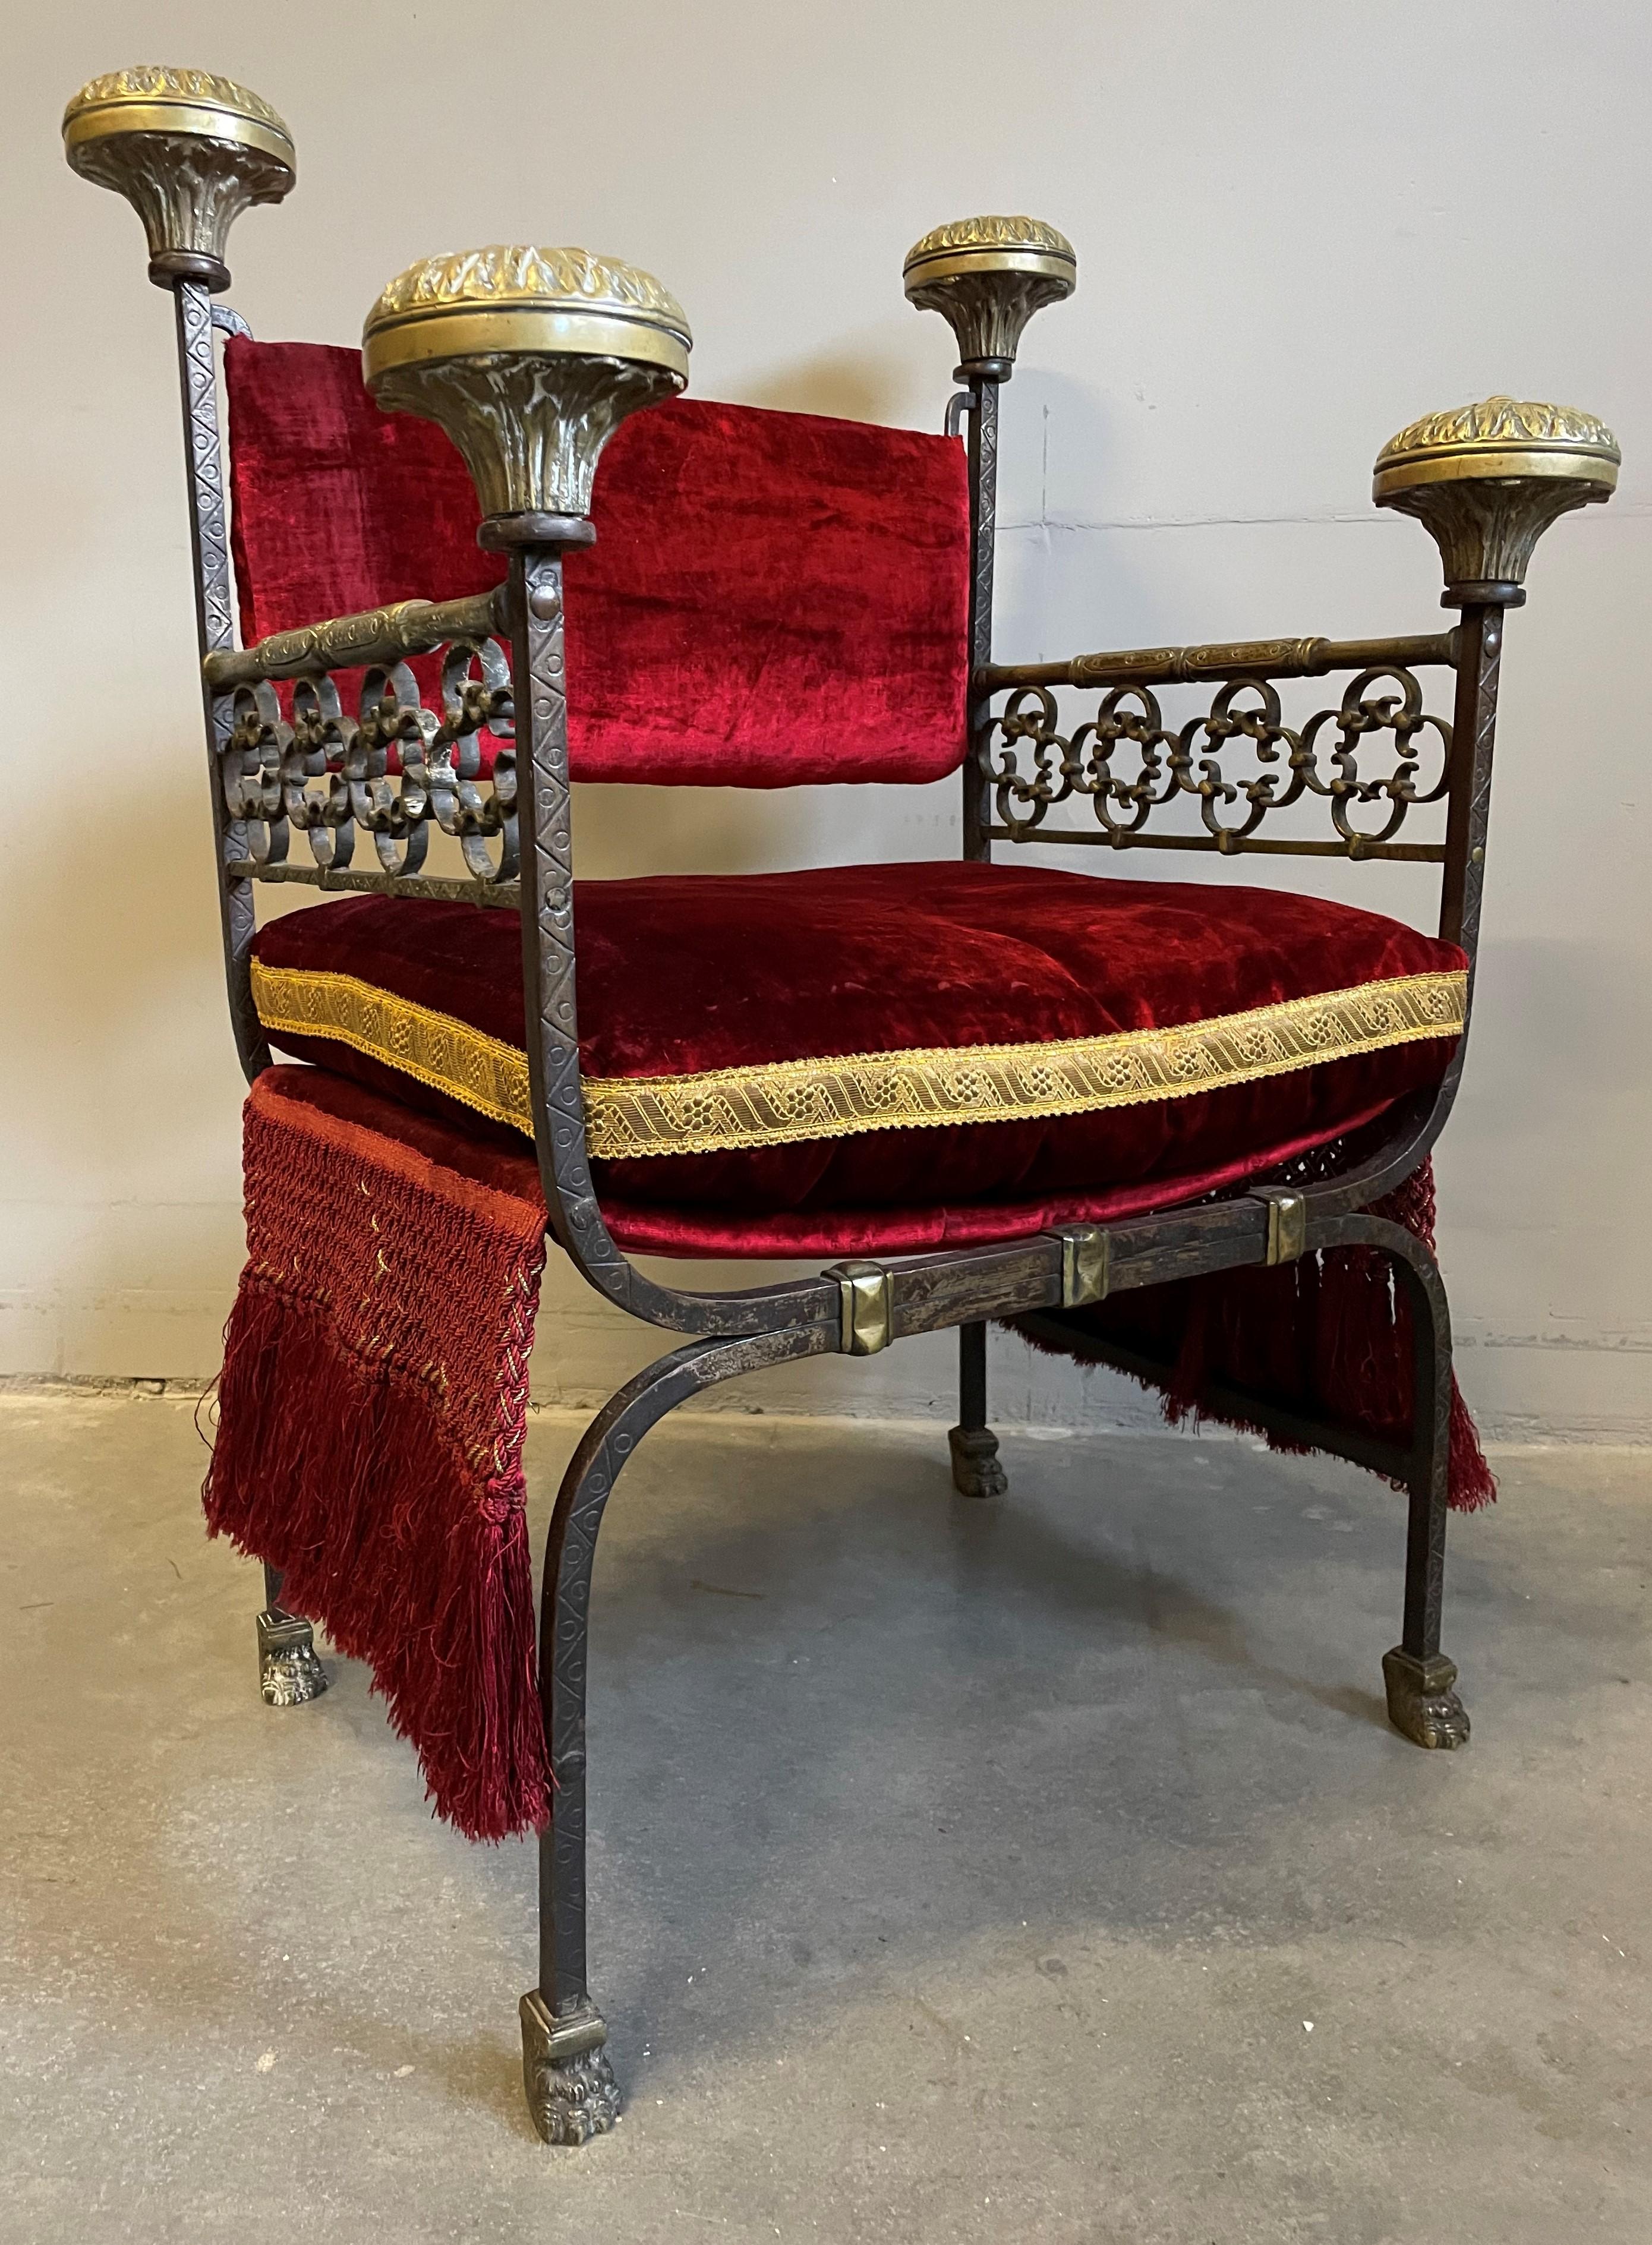 Unique, top quality made and highly decorative antique Gothic chair.

If you are looking for rare, stylish and top-quality made antiques to decorate your home, castle or church then this amazing workmanship chair from the 1800s could be perfect for